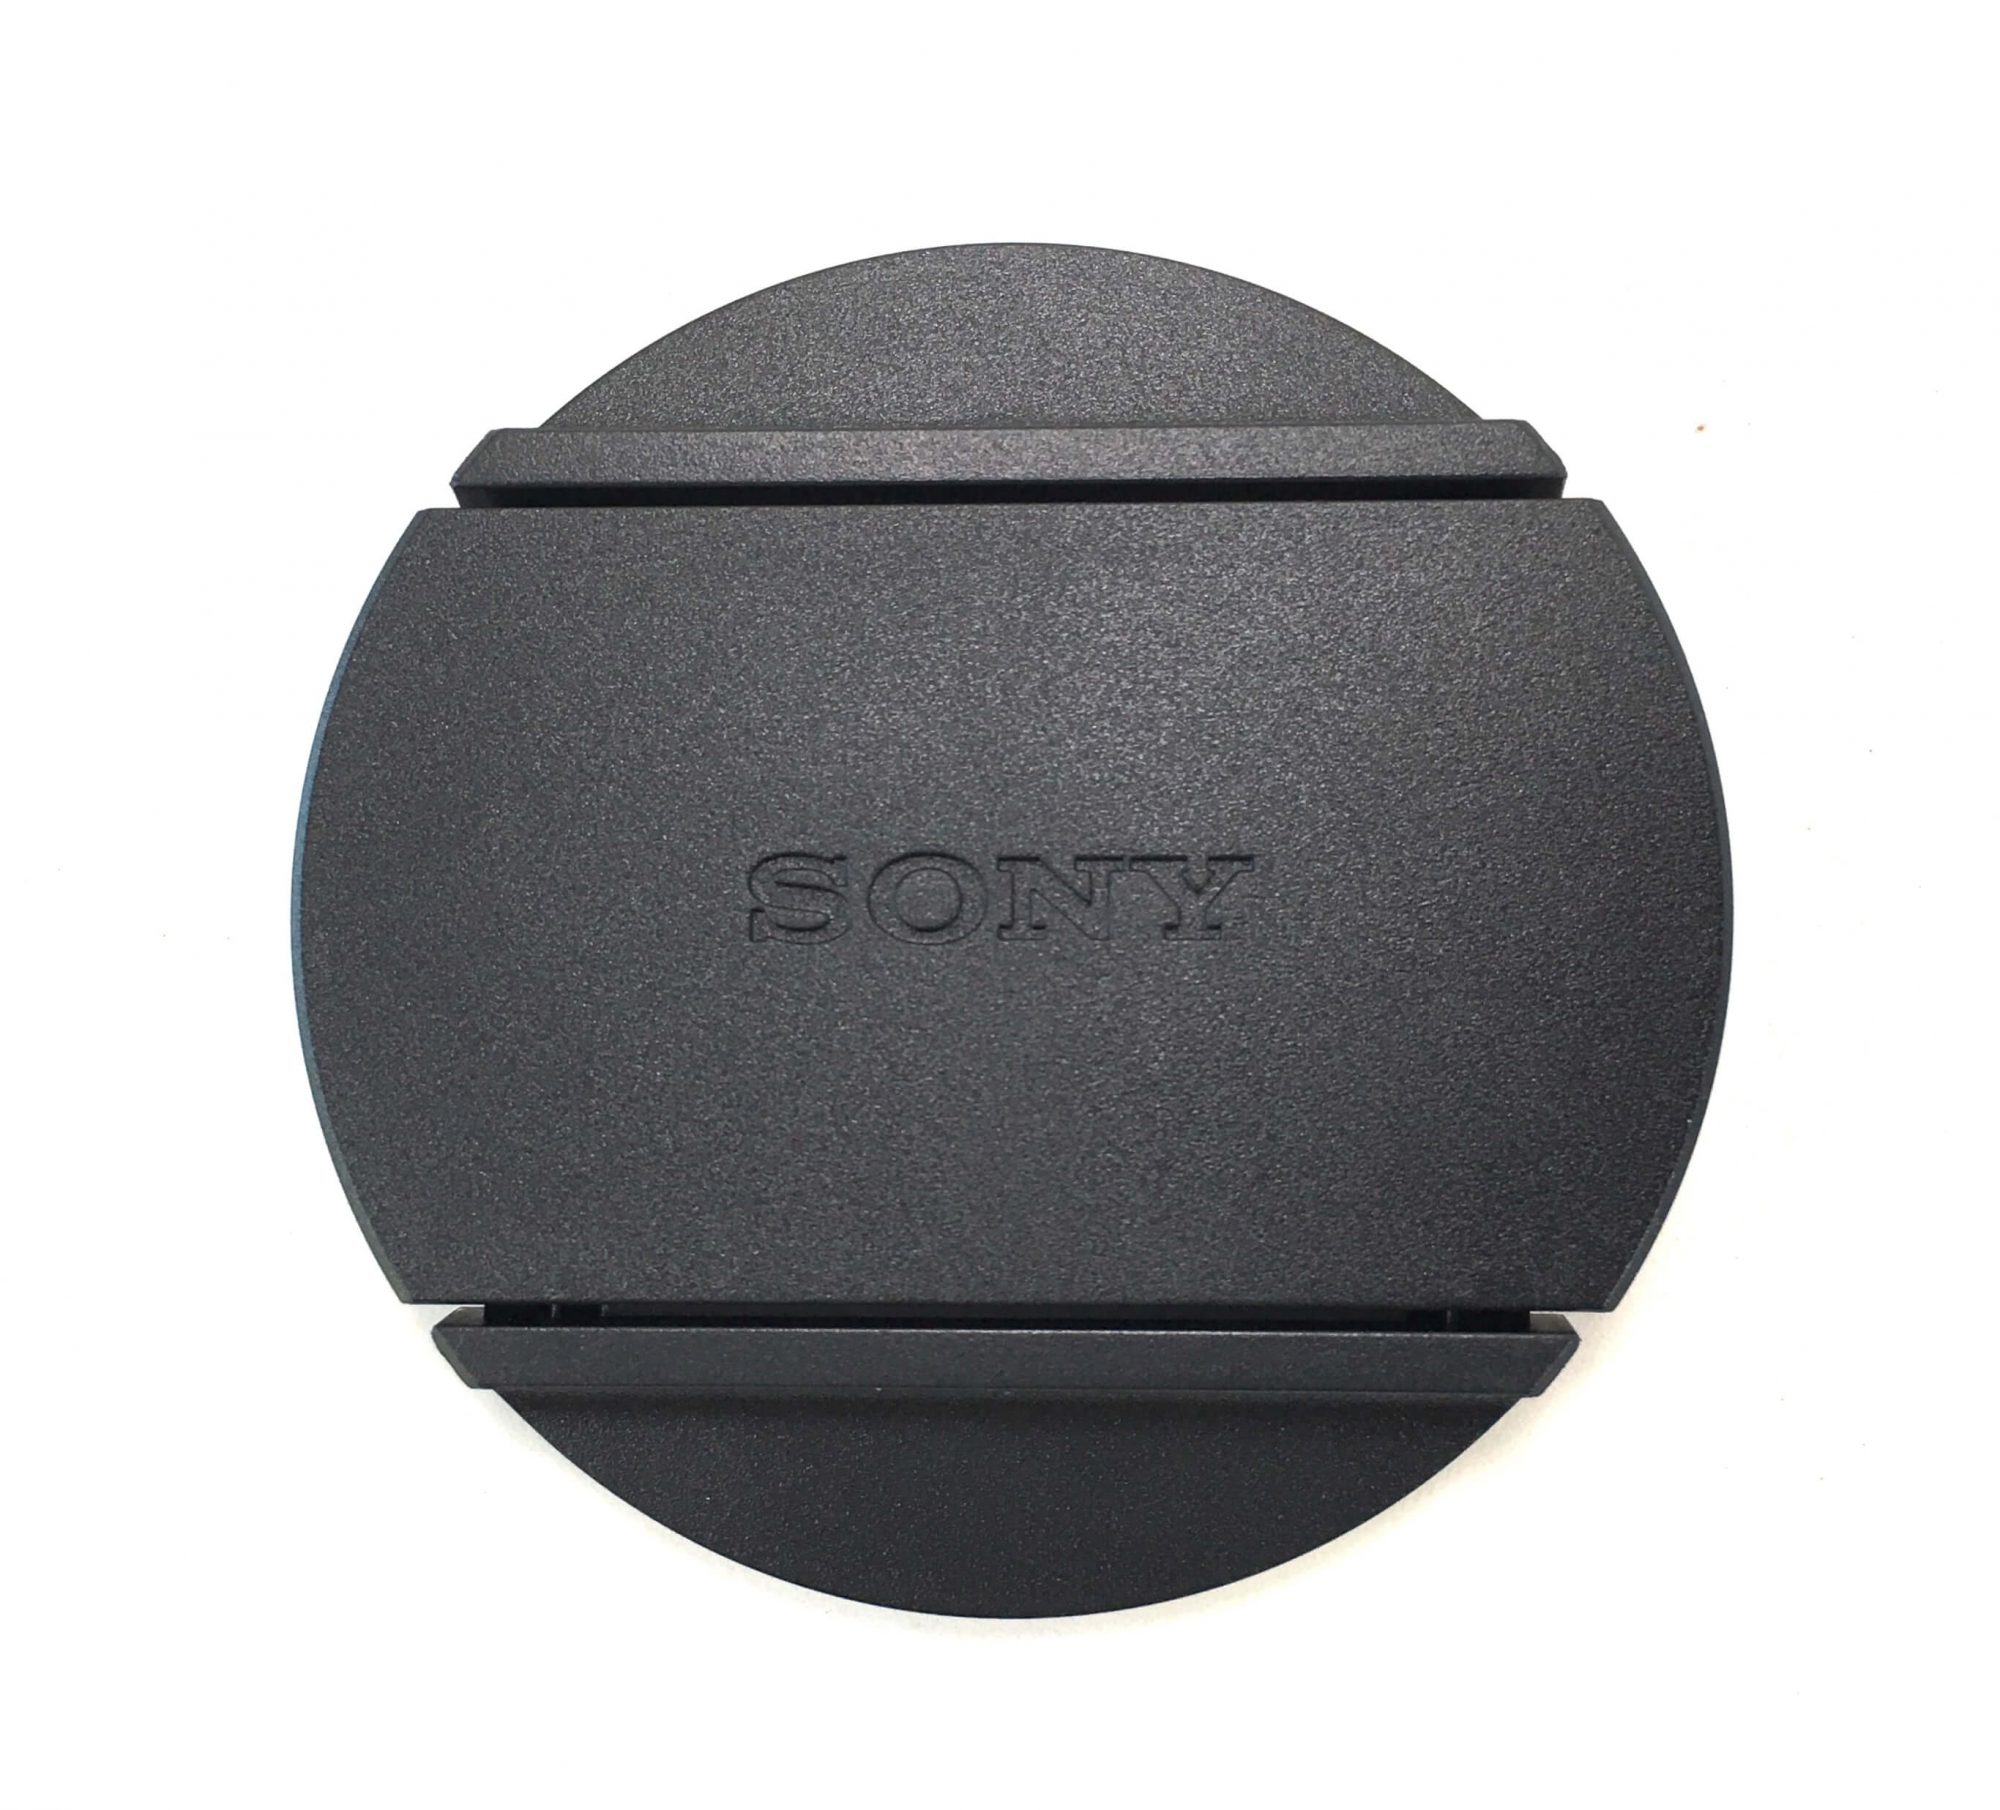 Original Lens Cap that fits on the Sony HDR-CX900 camcorder. It is a genuine Sony part, sourced directly from Sony USA. Brand new factory fresh. Free Shipping.